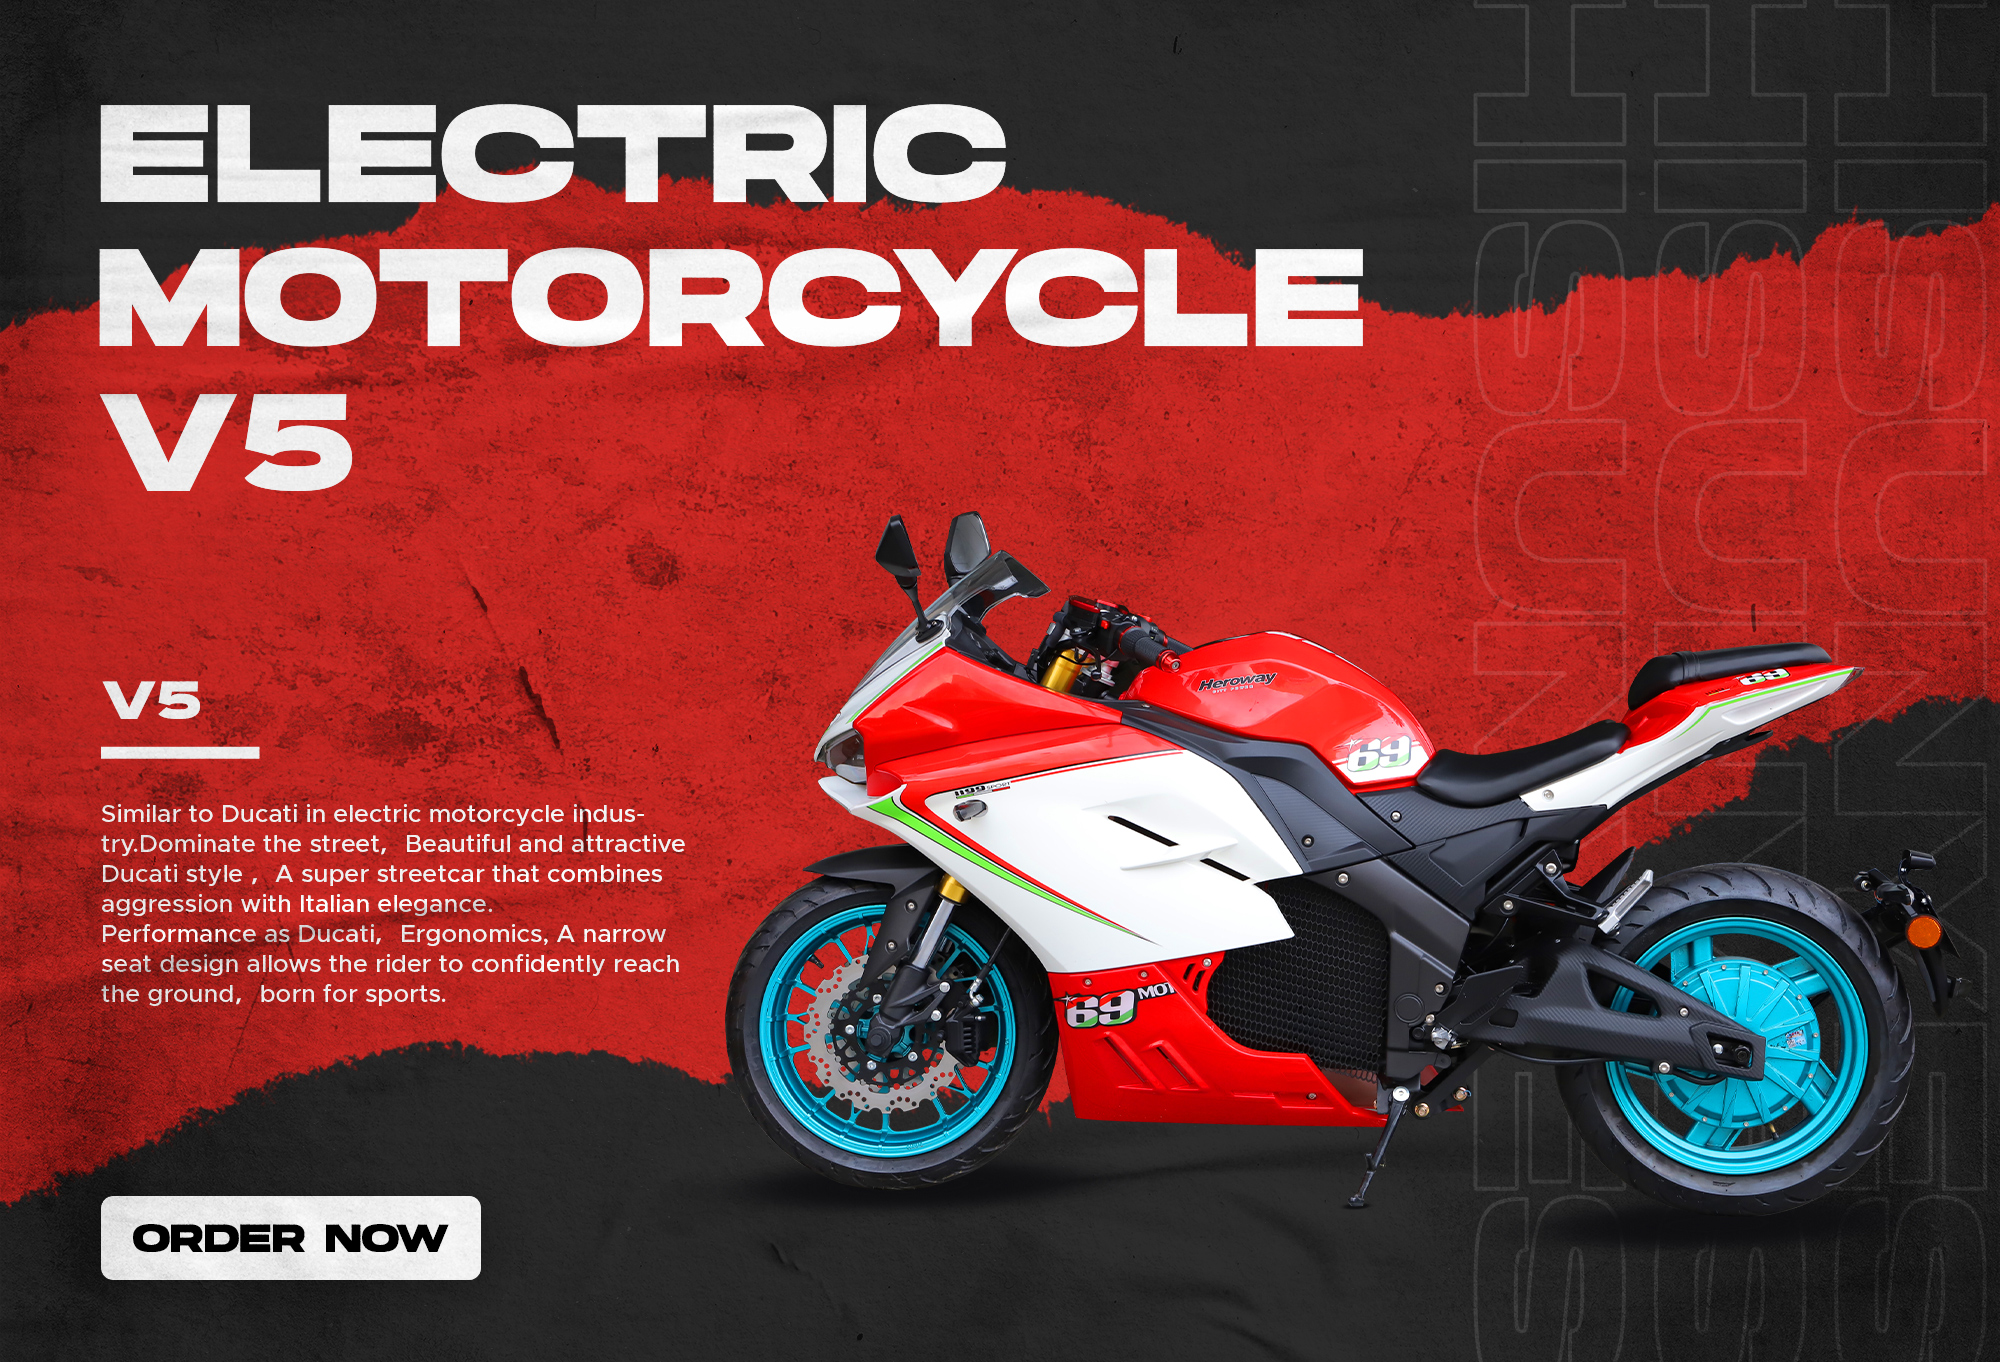 The Electric Motorcycle V5 has Different configurations